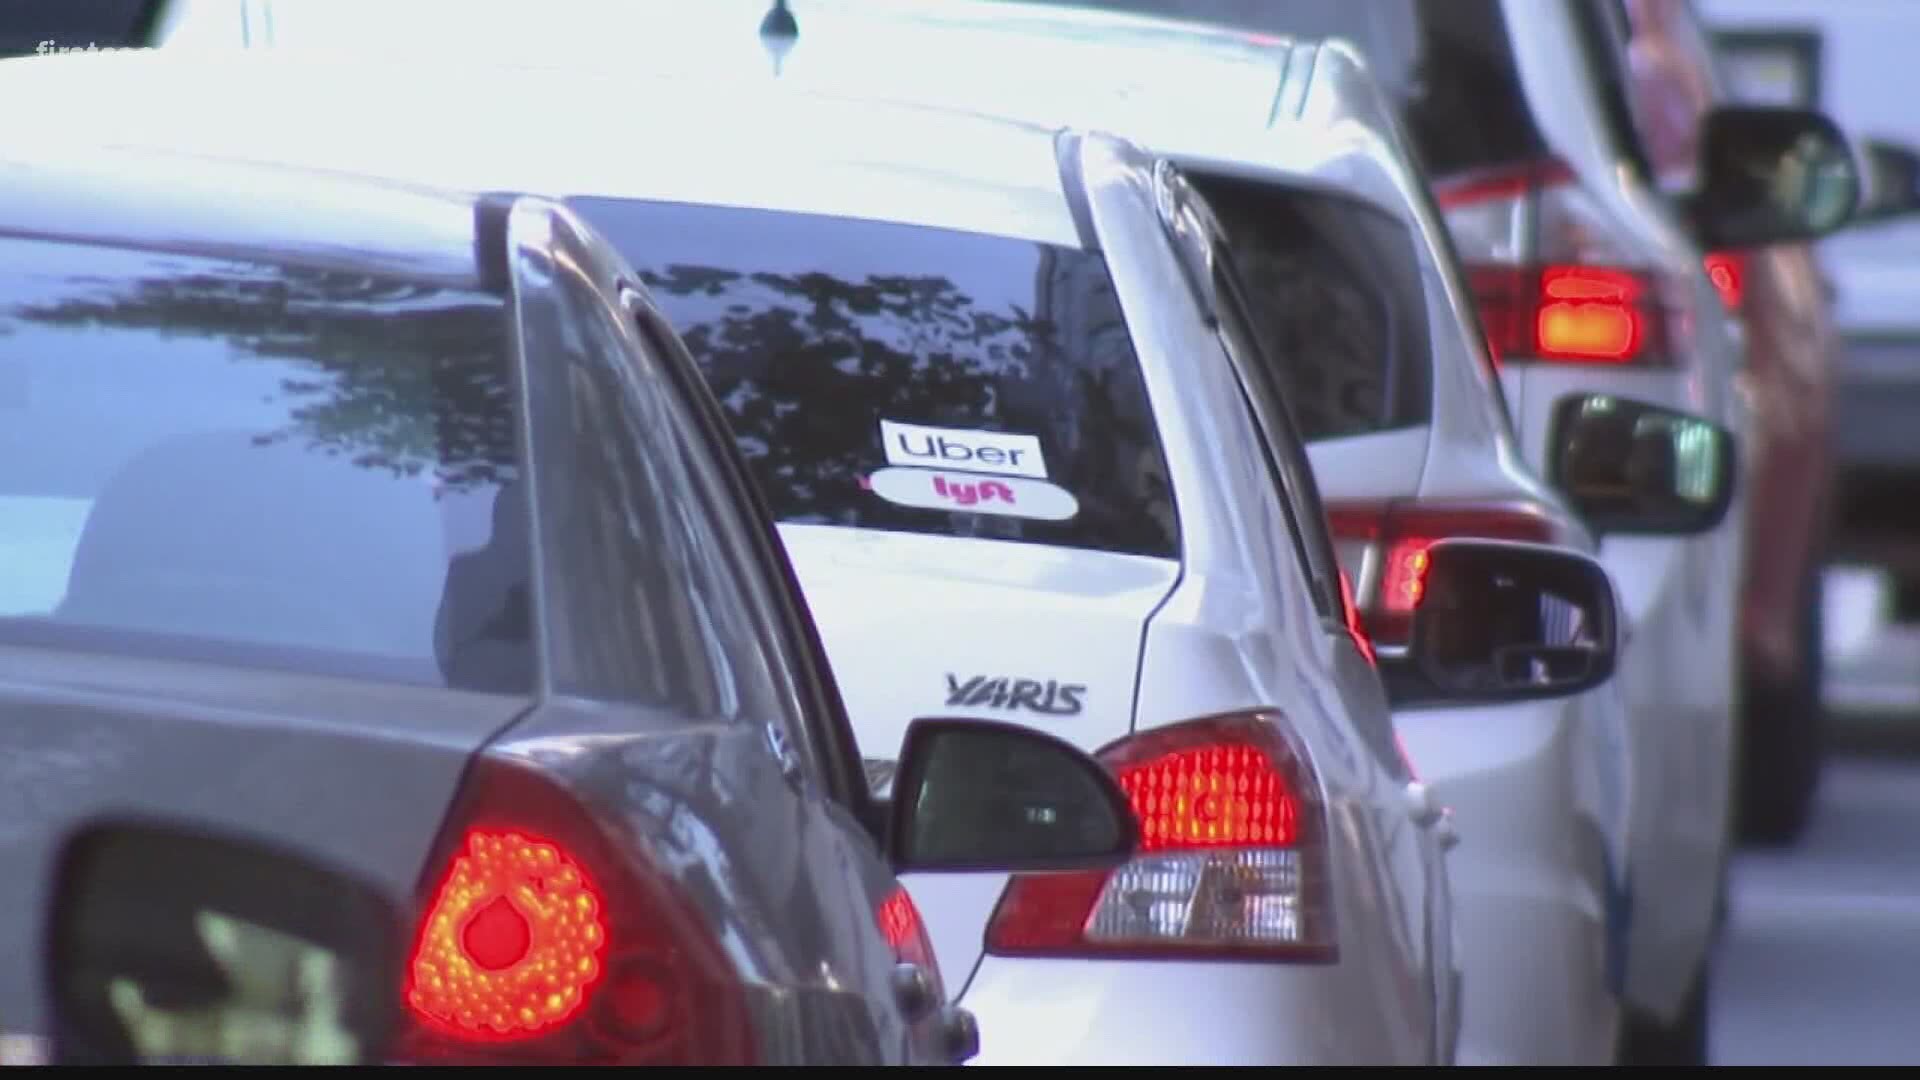 Drivers who already have electric vehicles will receive an extra $1.50 per trip.